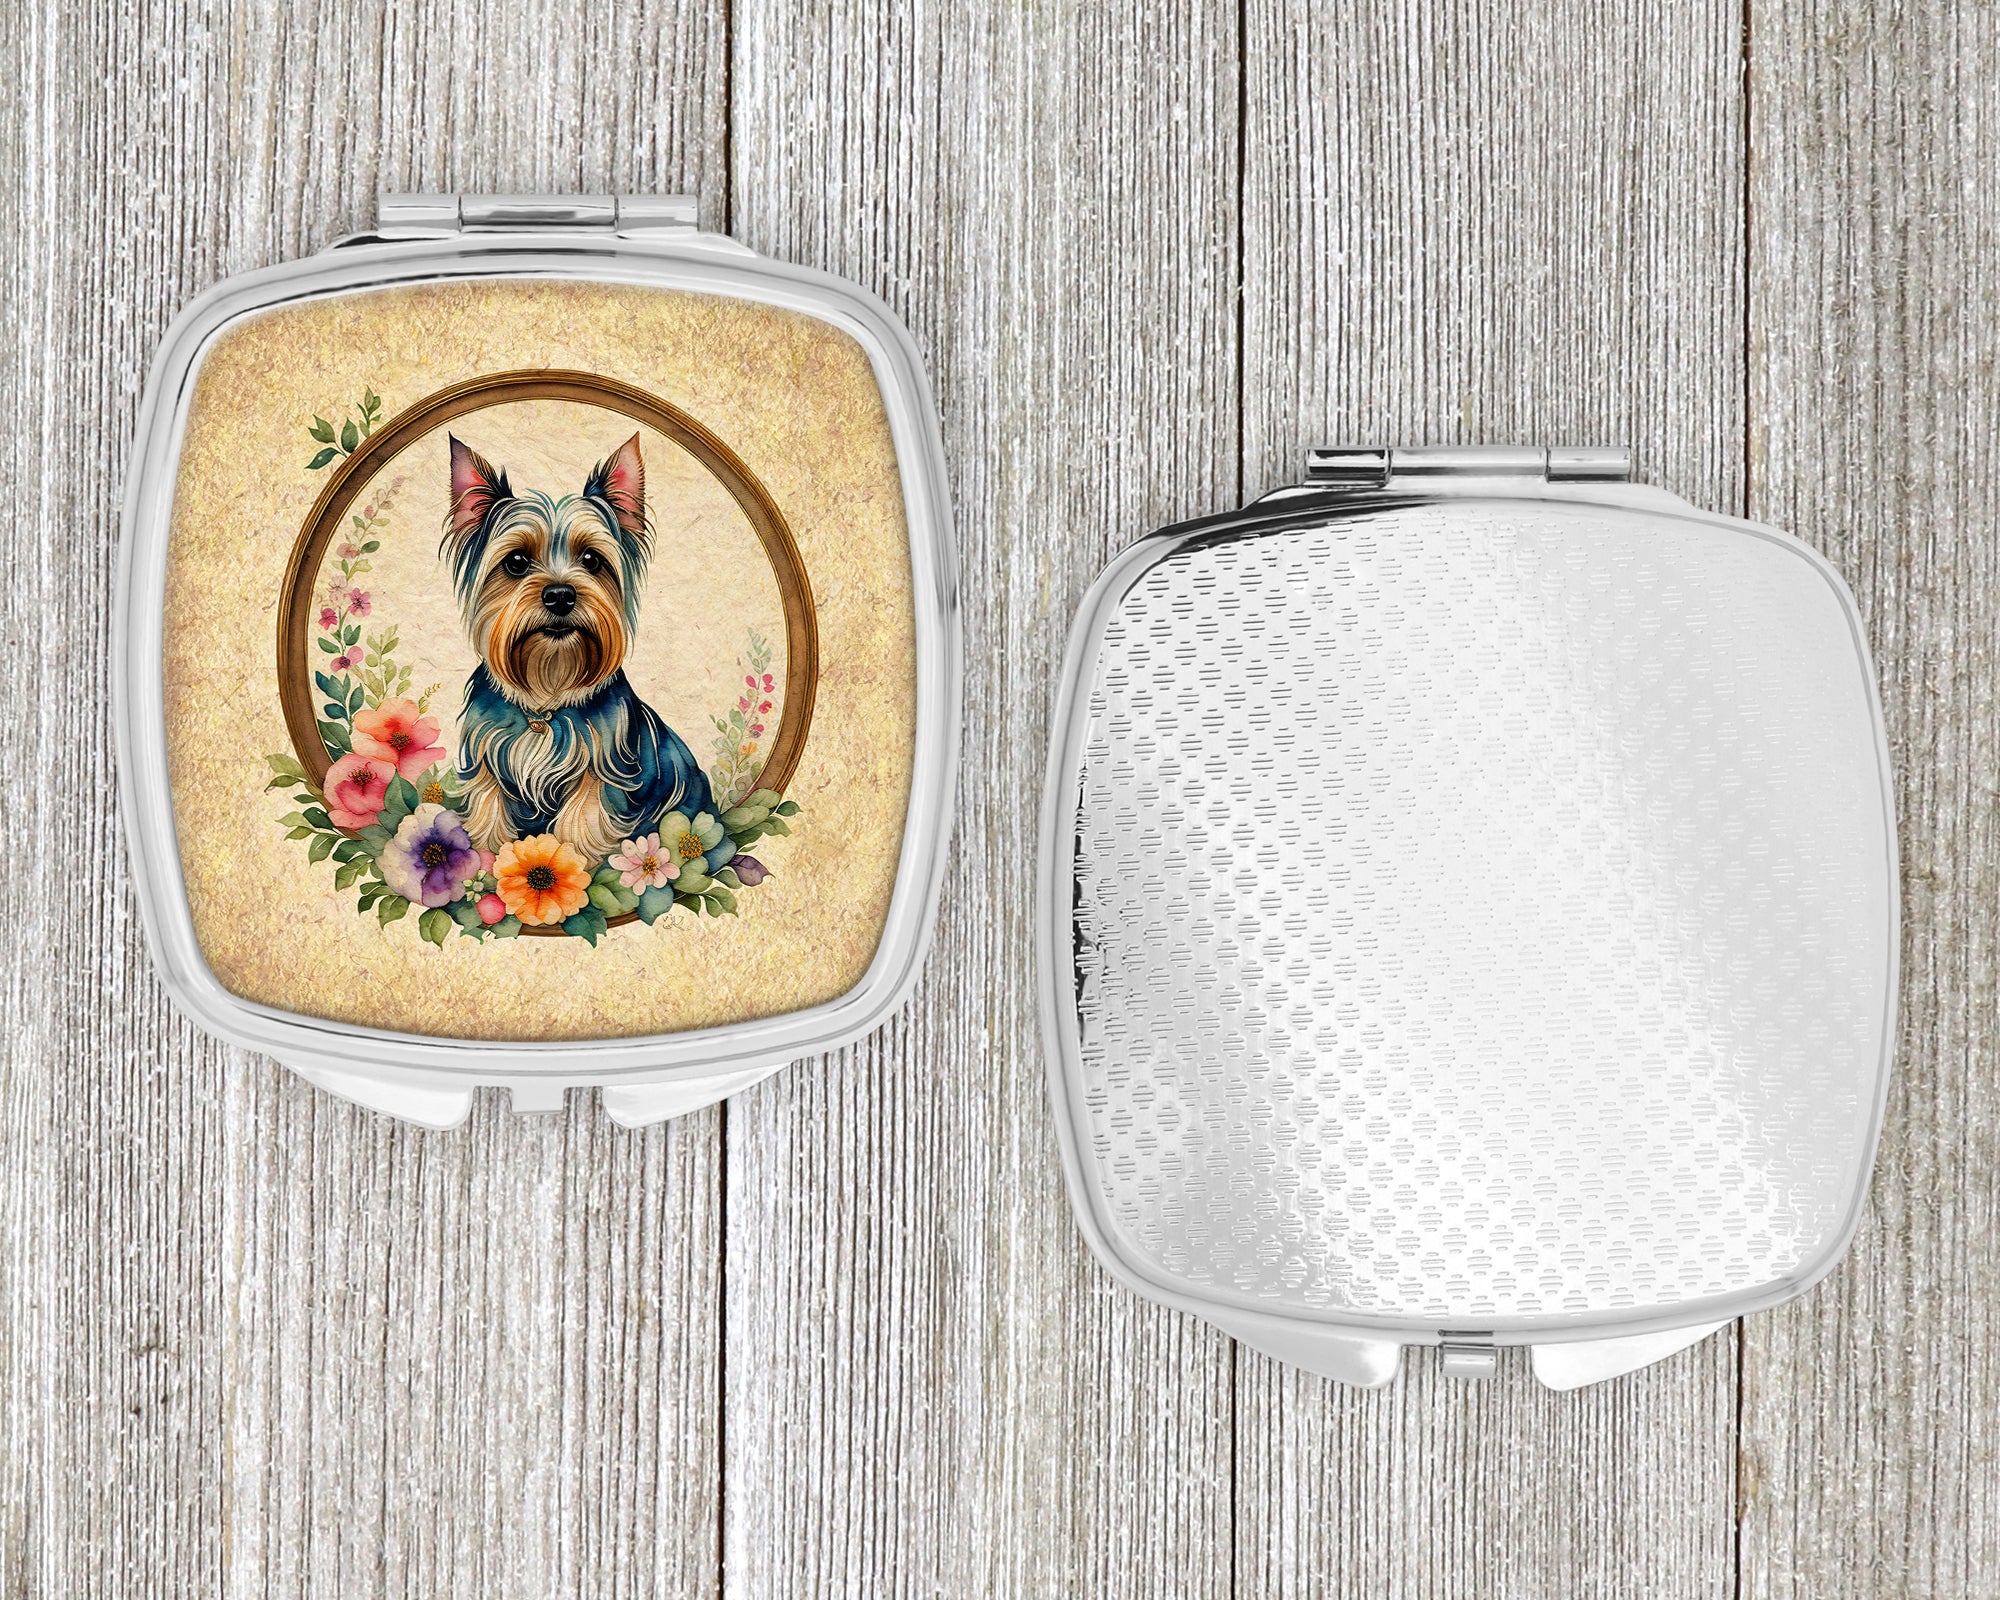 Silky Terrier and Flowers Compact Mirror